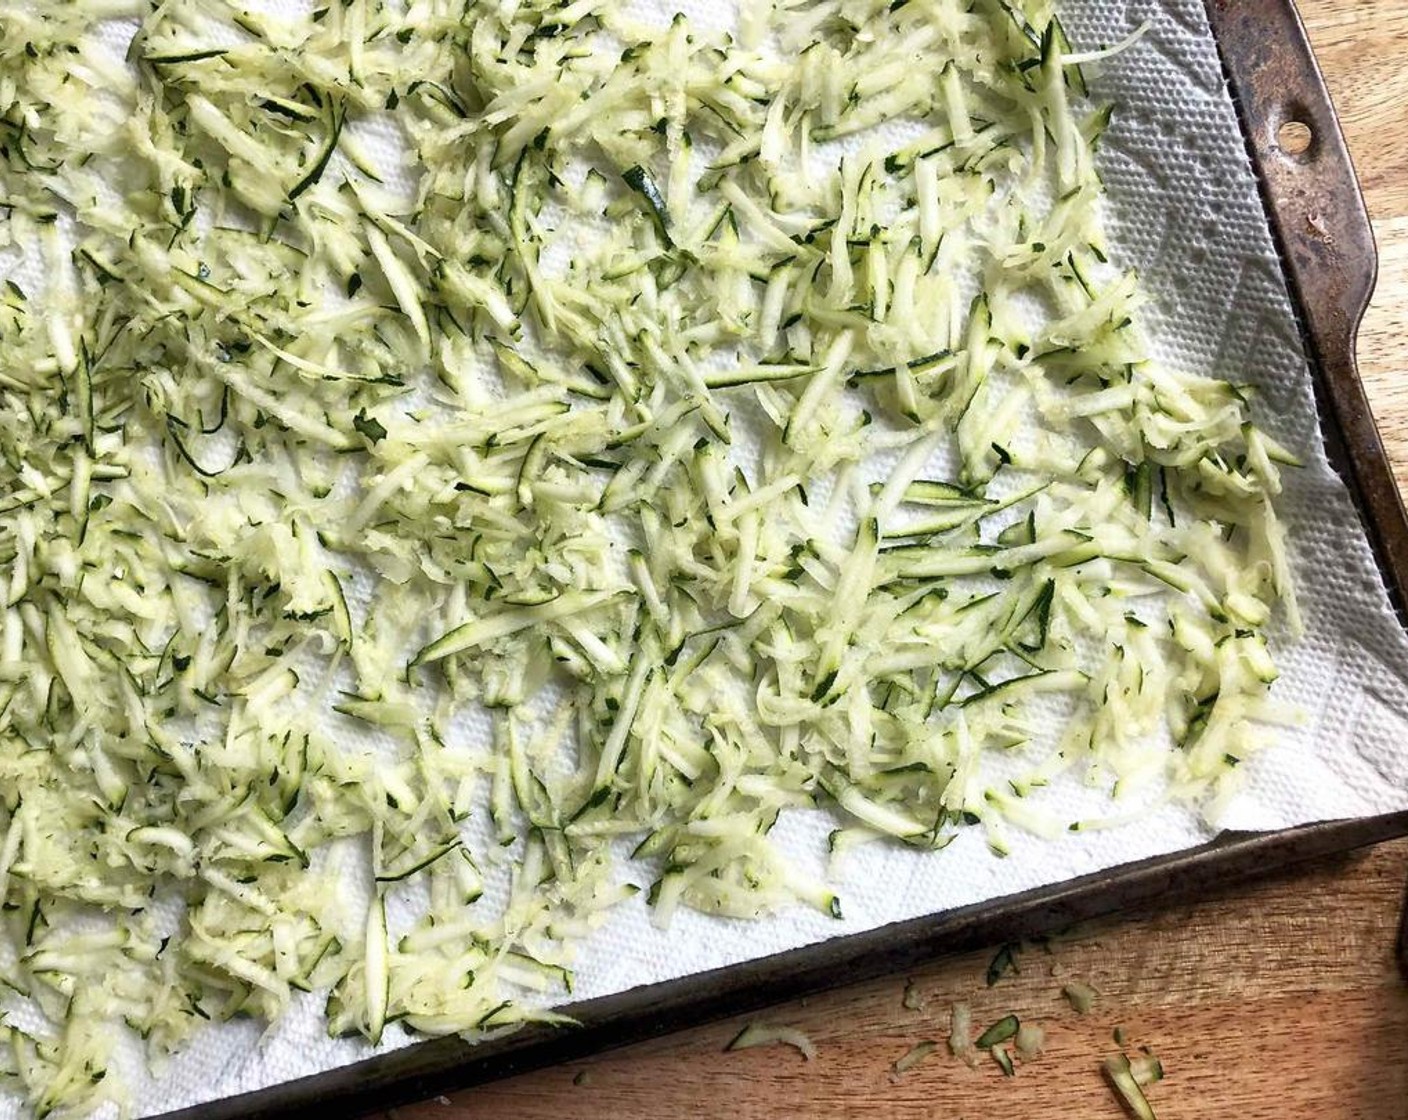 step 1 Line a 15 x 10 x 1-inch baking pan with several layers of paper towels. Spread Zucchini (1 3/4 cups) on paper towels and sprinkle with Salt (1/2 tsp). Top with another layer of paper towels and let stand for 15 minutes, pressing occasionally to release the excess moisture.